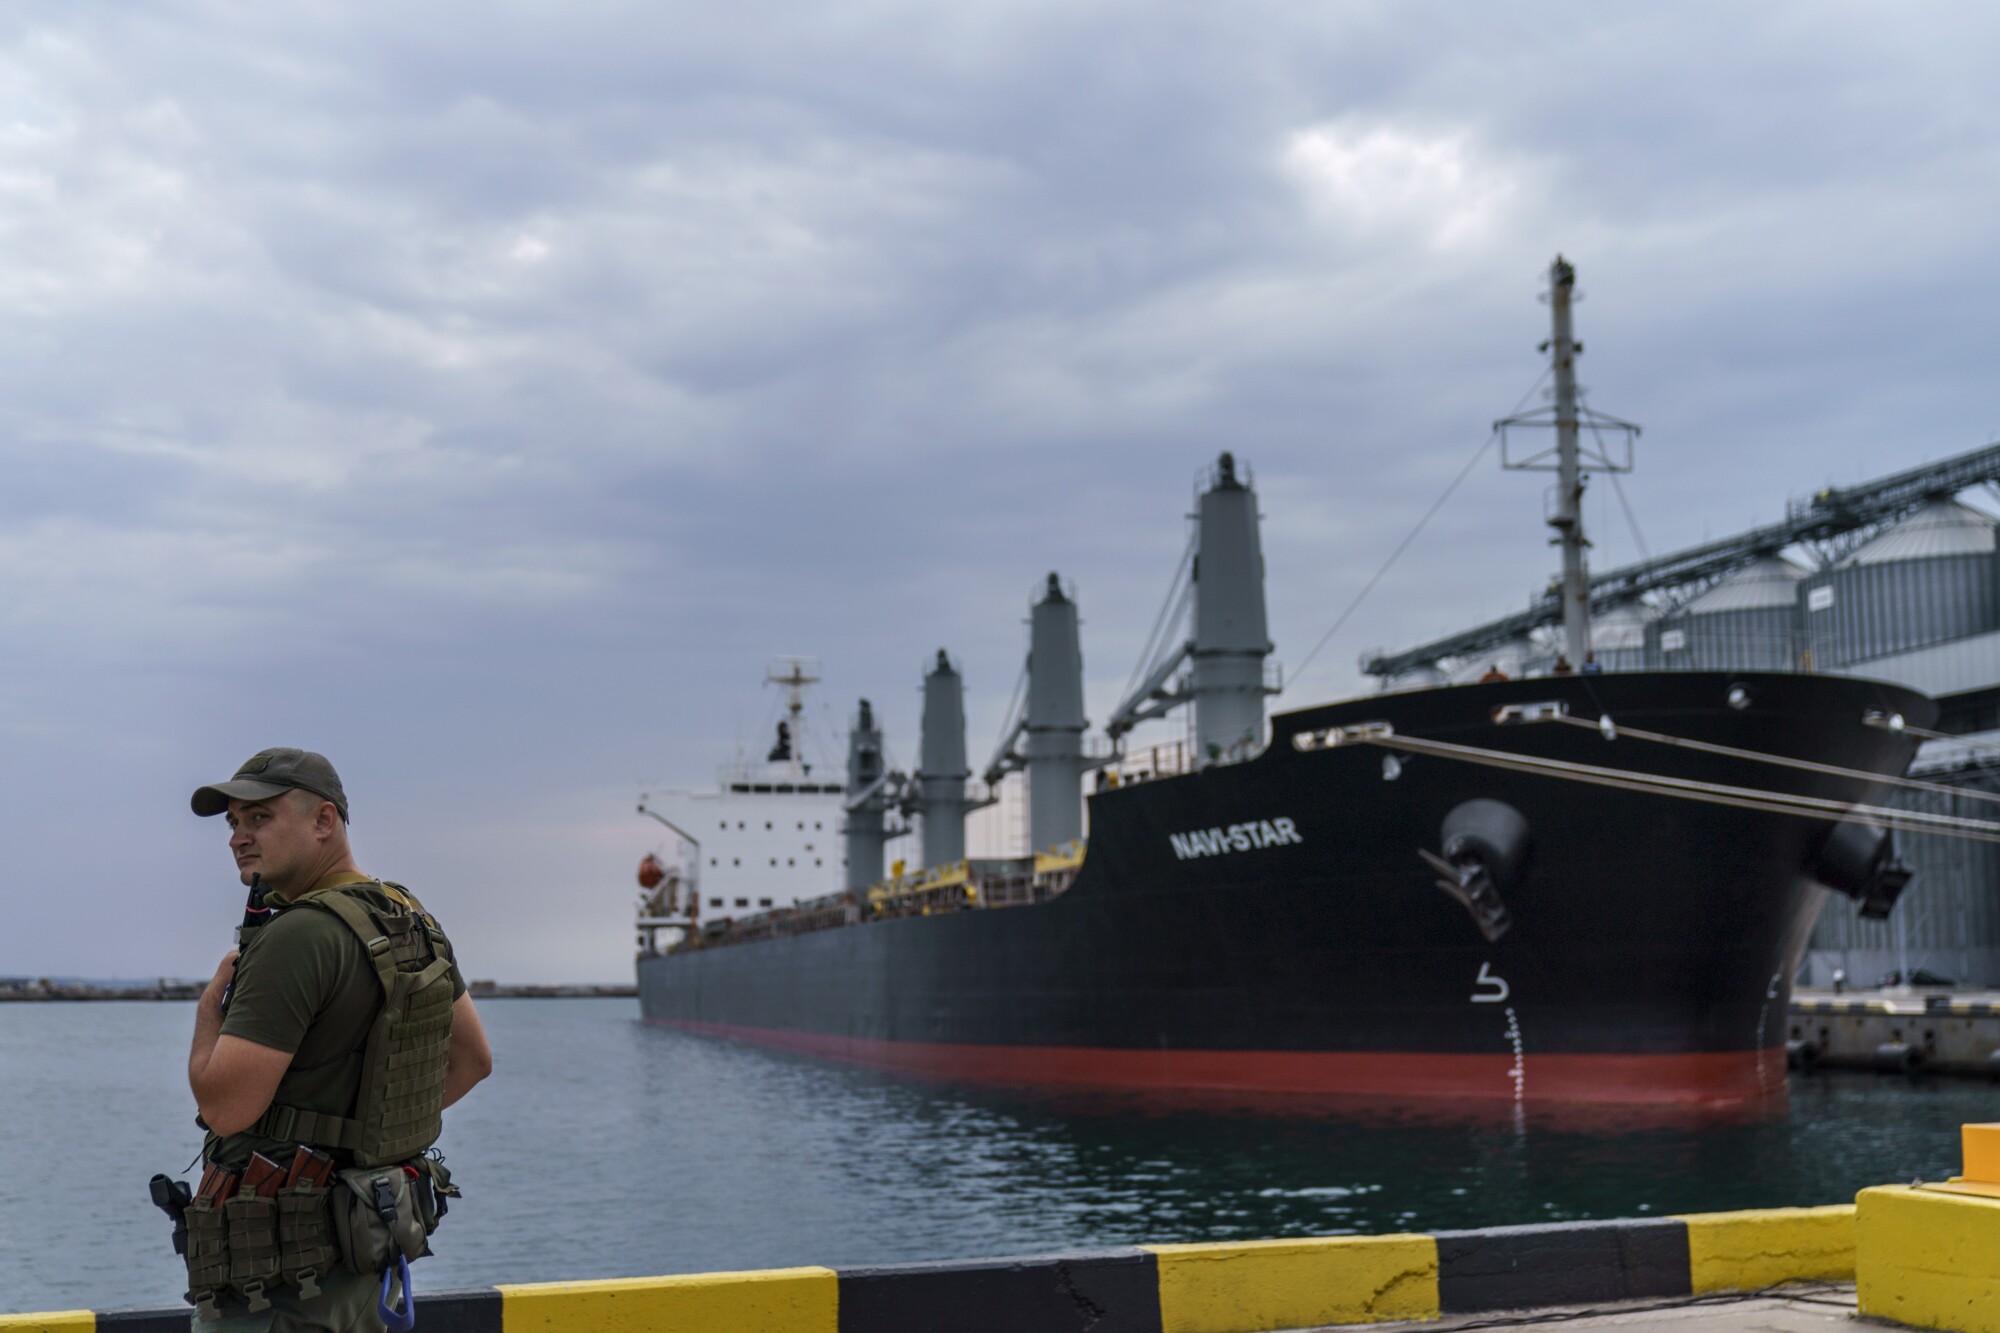 A security officer standing next to a ship in the port.